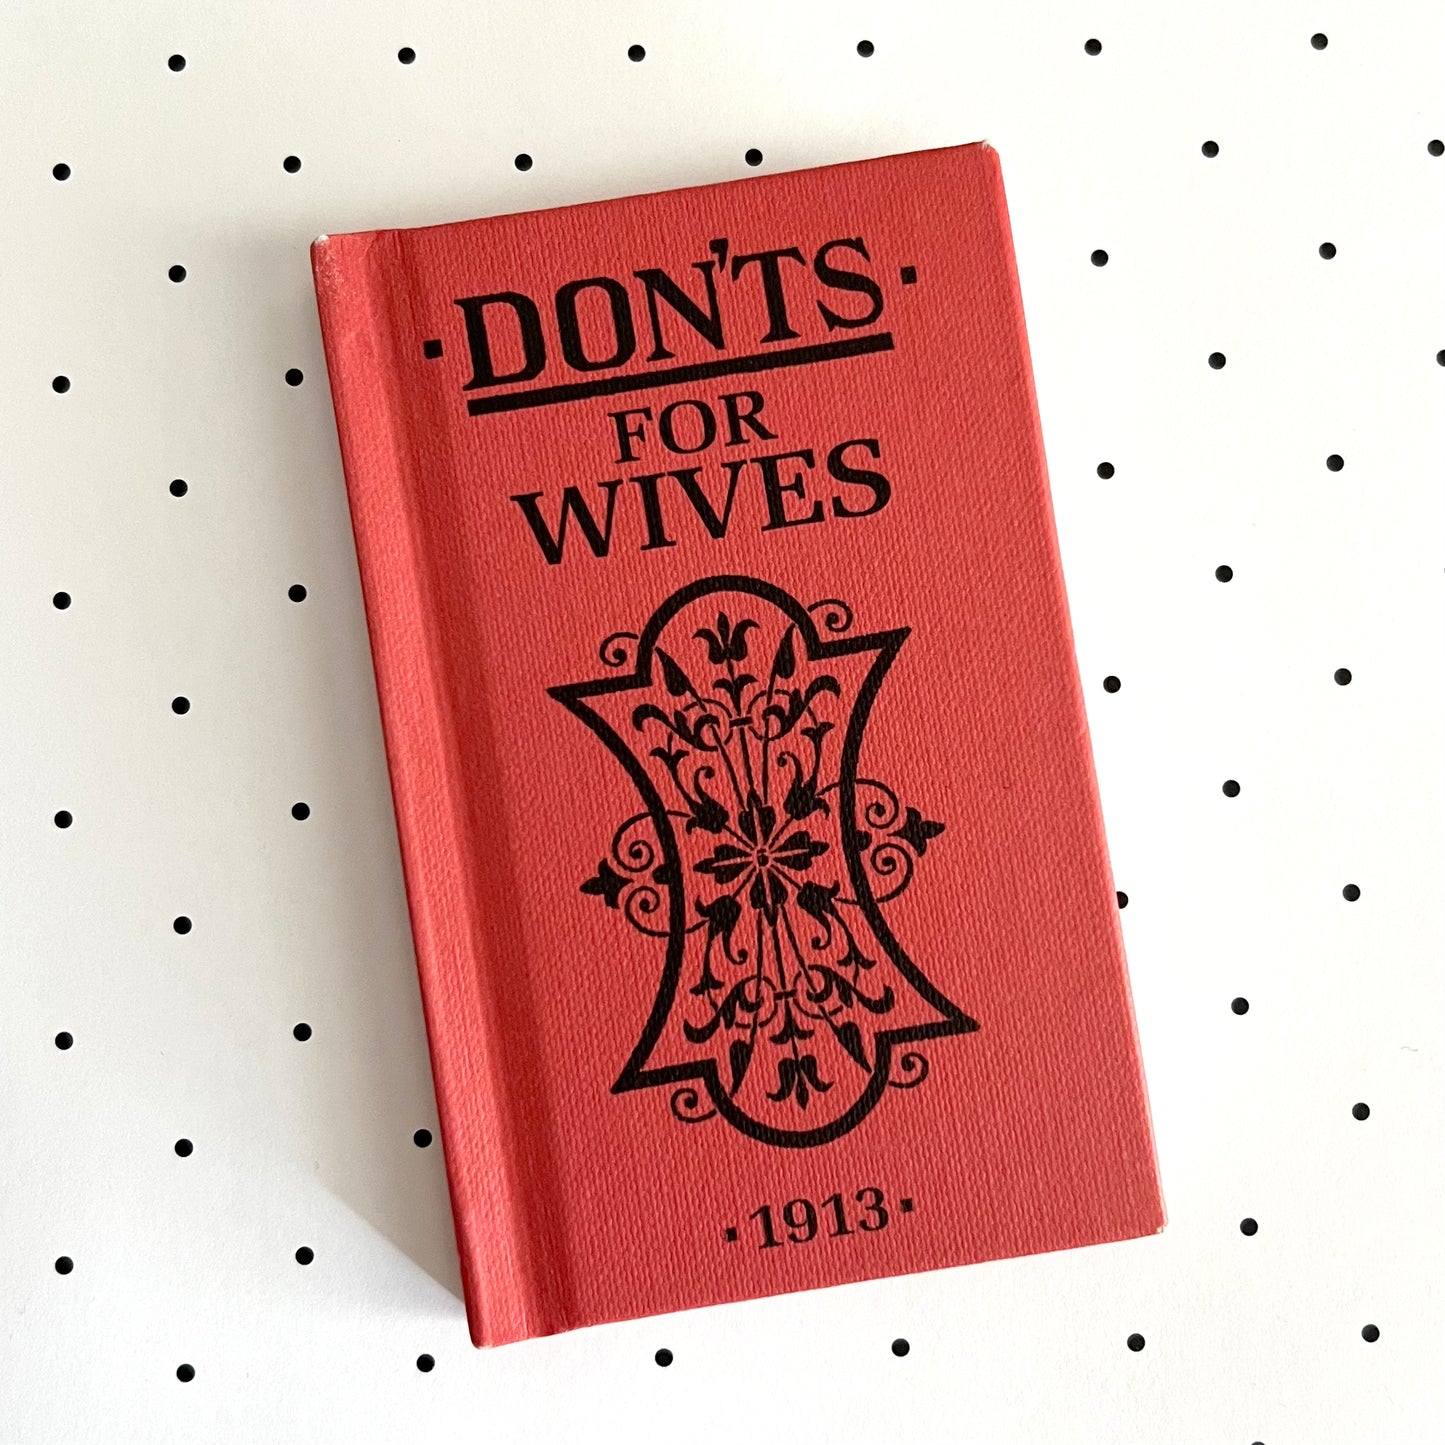 Don'tforwives